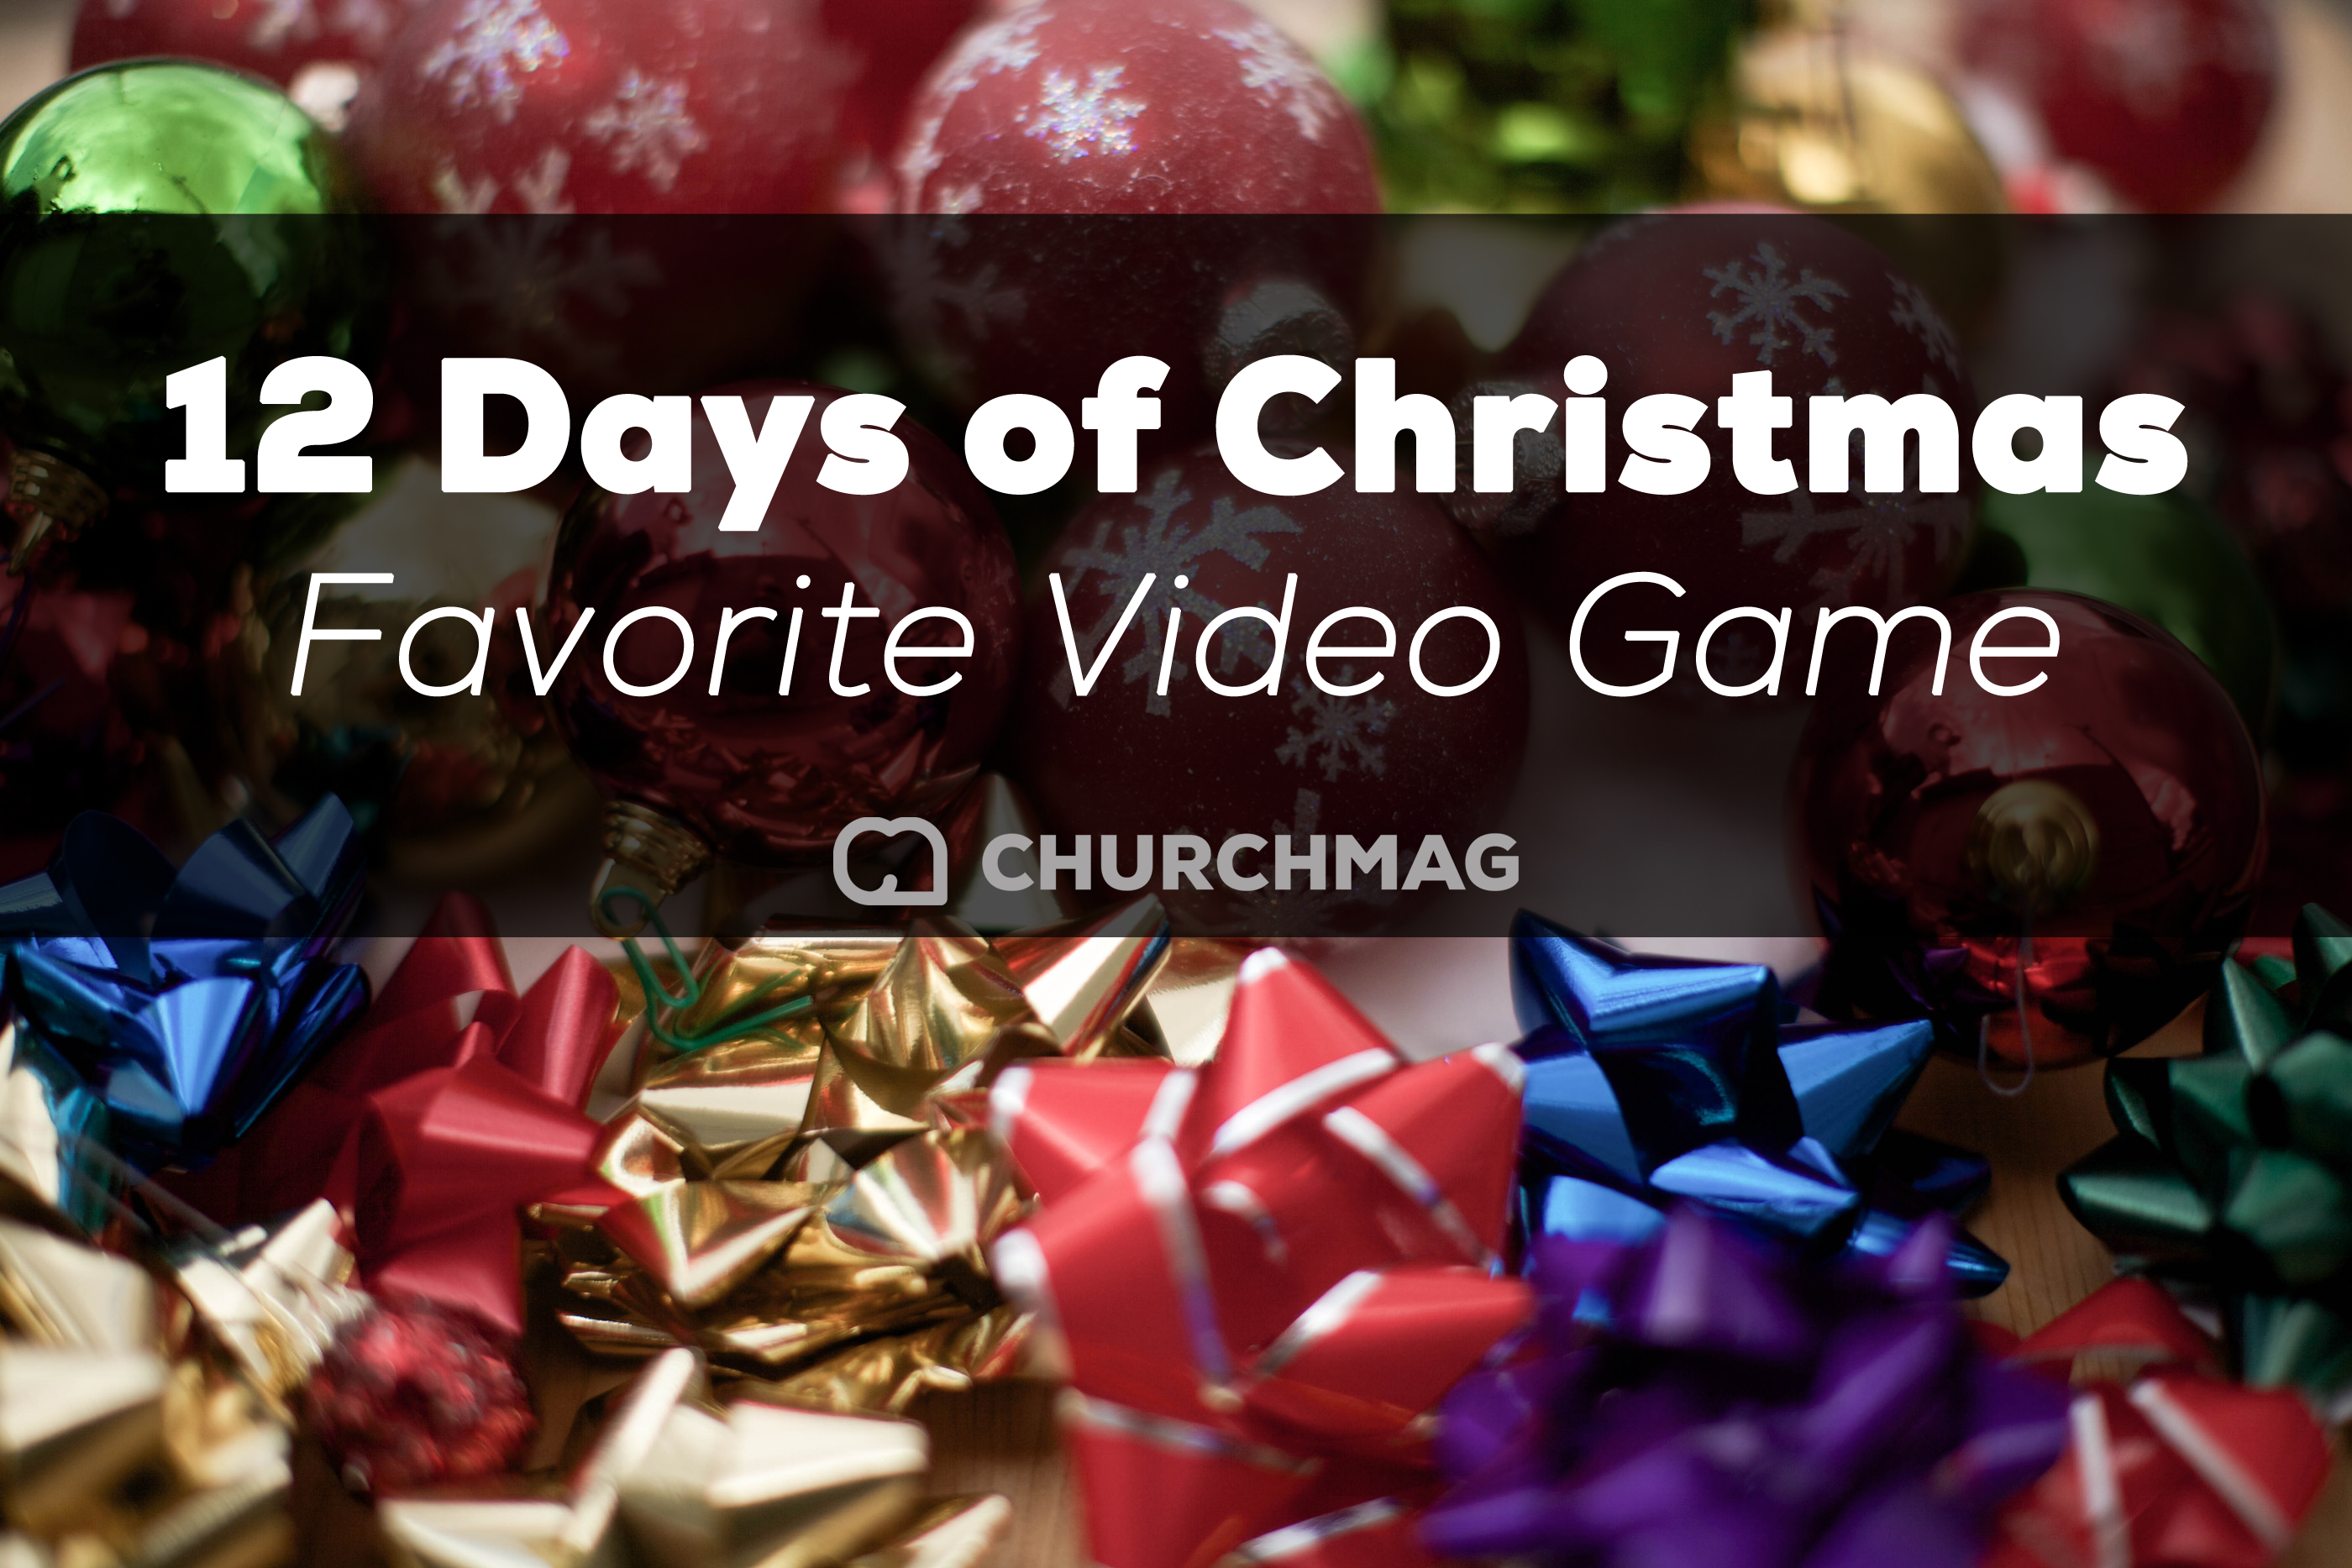 12 Days of Christmas: Favorite Video Game